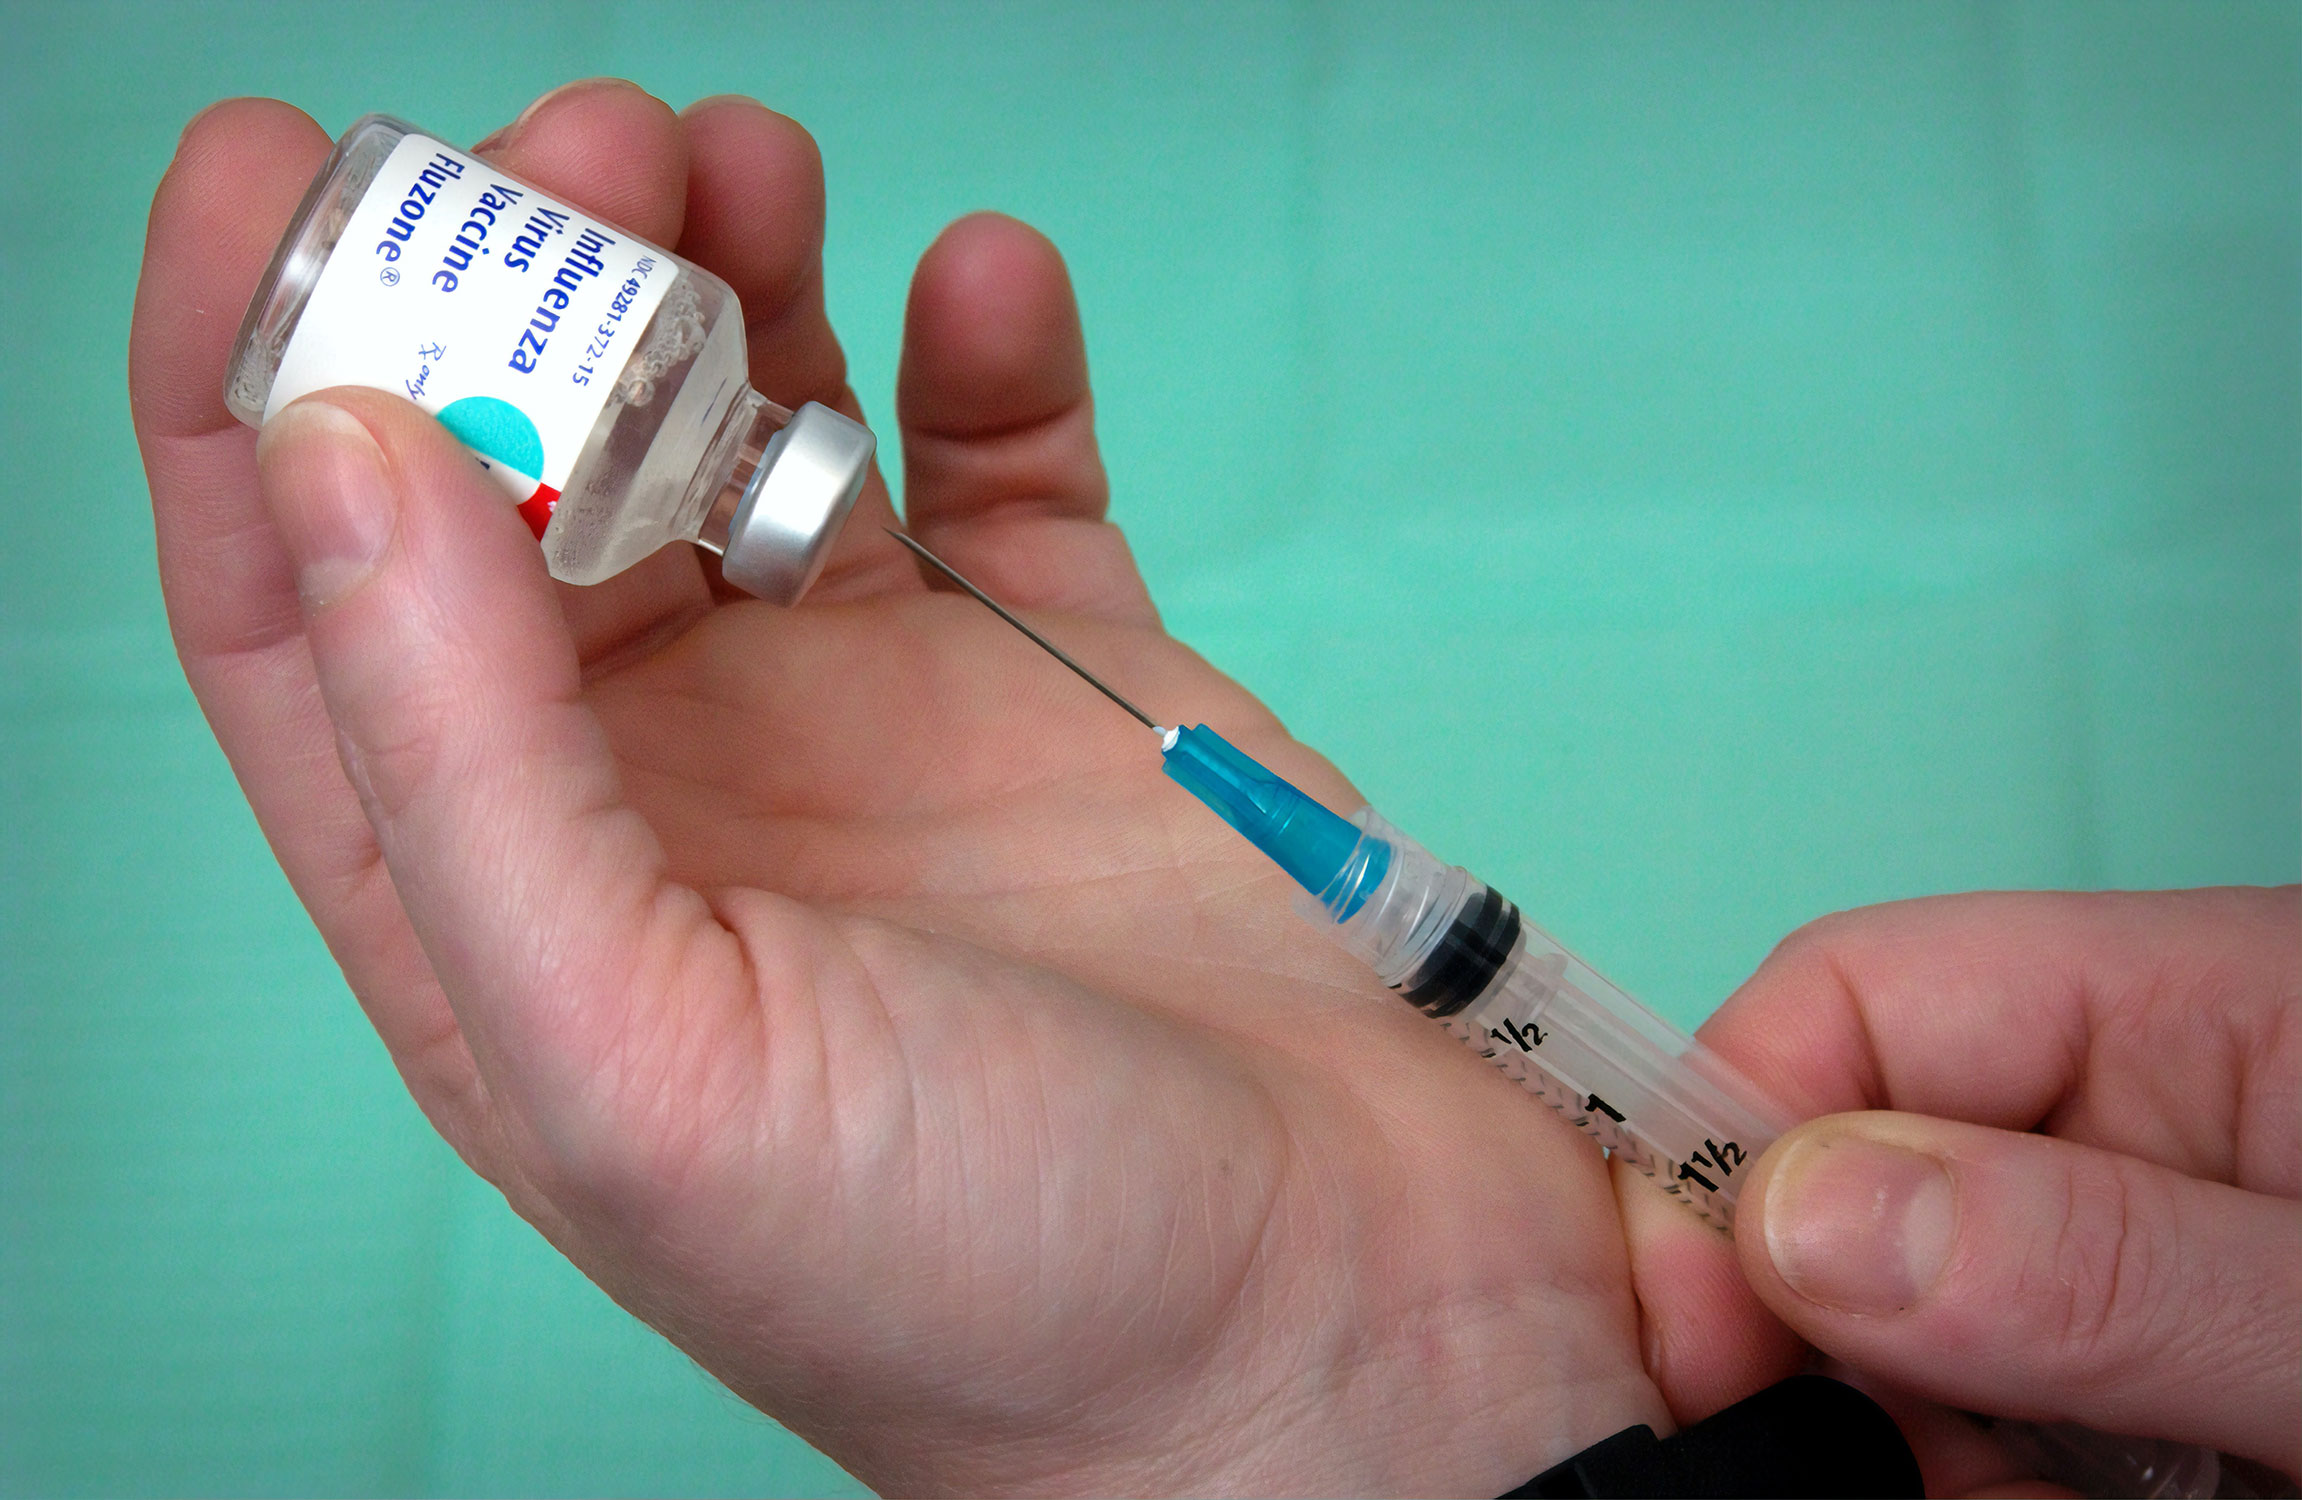 How the vaccine roll out could impact cross-border businesses